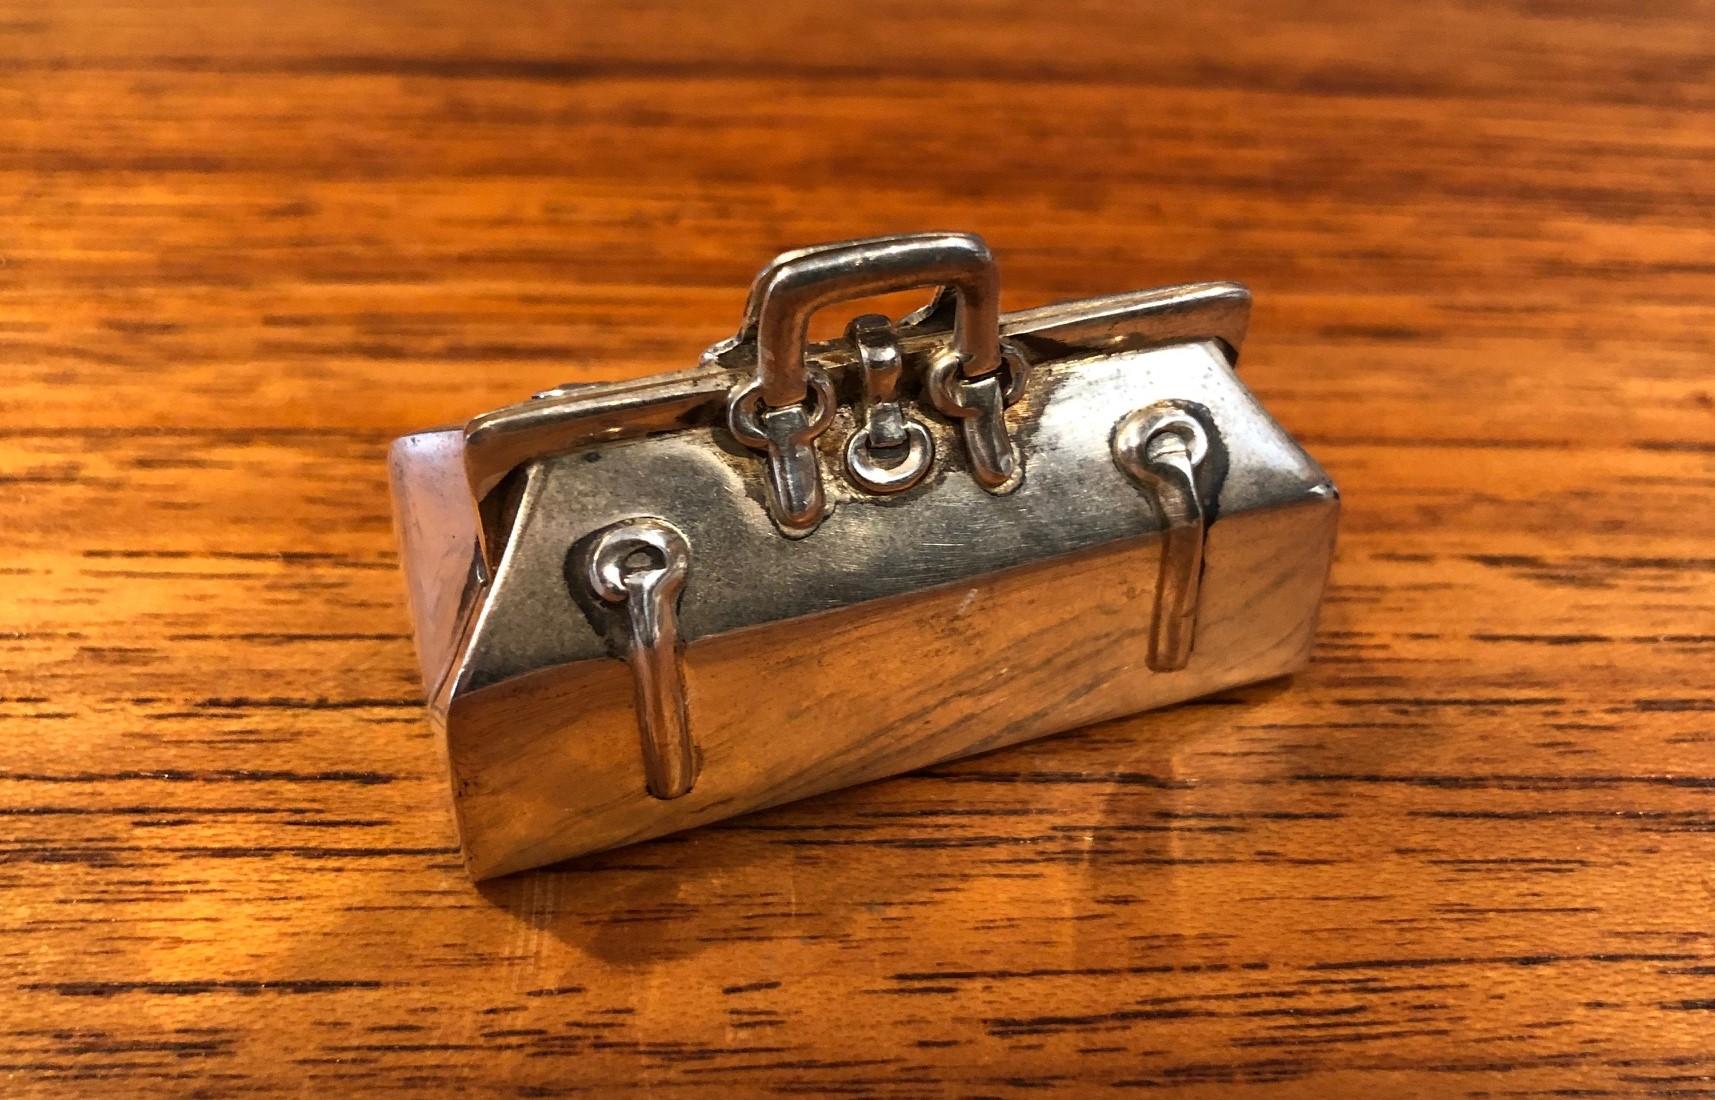 Sterling silver doctors / medical bag bill box in sterling silver, circa 1970s. The piece is in superb condition with a hinged opening. A truly stunning piece with amazing detail and craftsmanship!
 